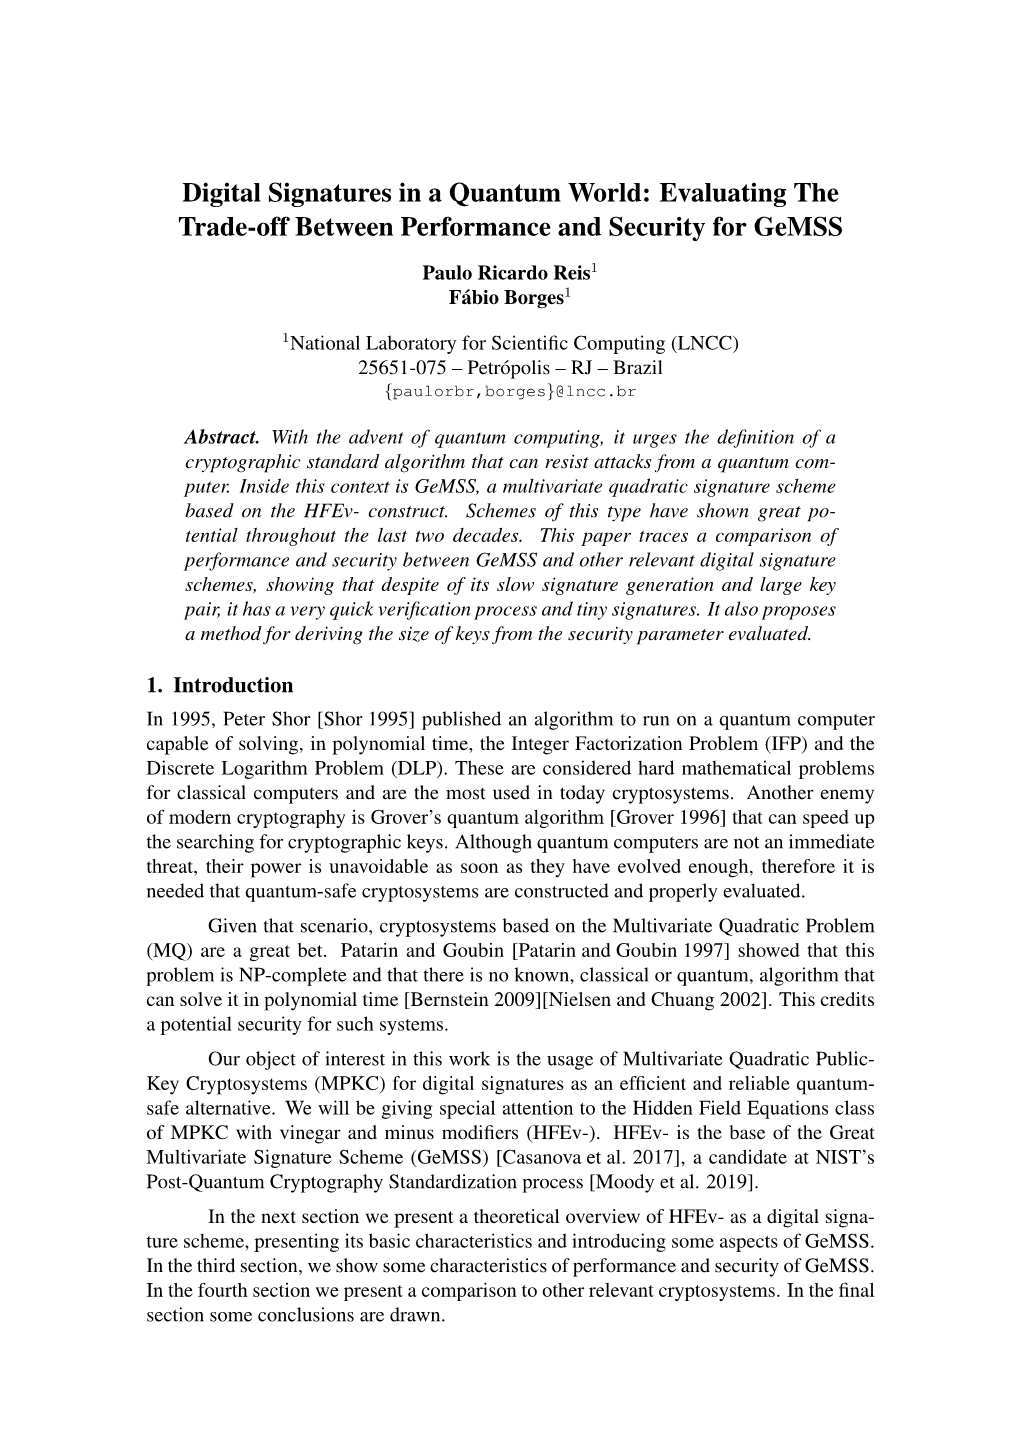 Digital Signatures in a Quantum World: Evaluating the Trade-Off Between Performance and Security for Gemss